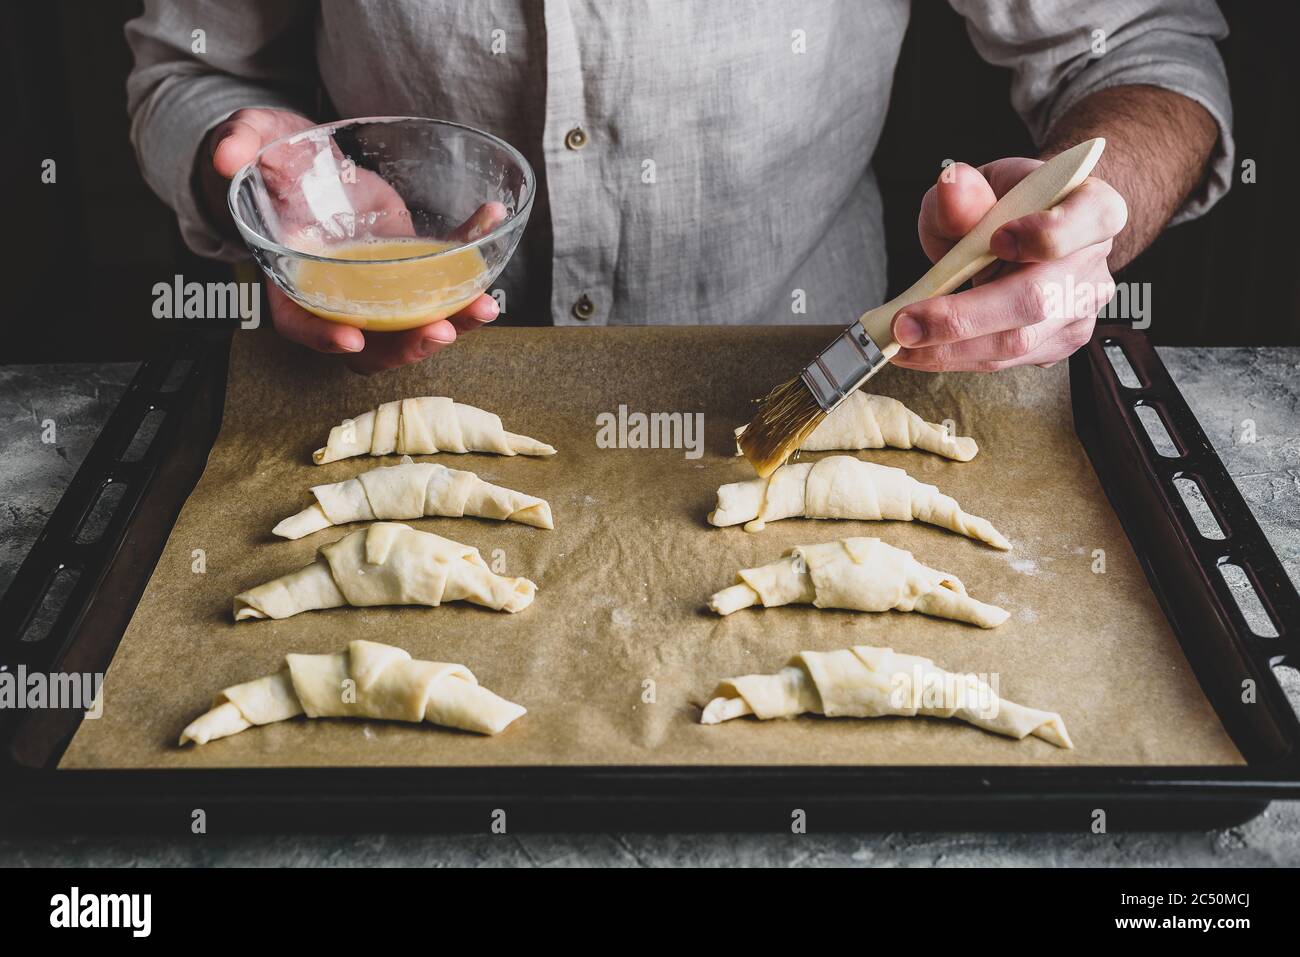 Baking sheet of raw croissants stuffed with chocolate spread Stock Photo